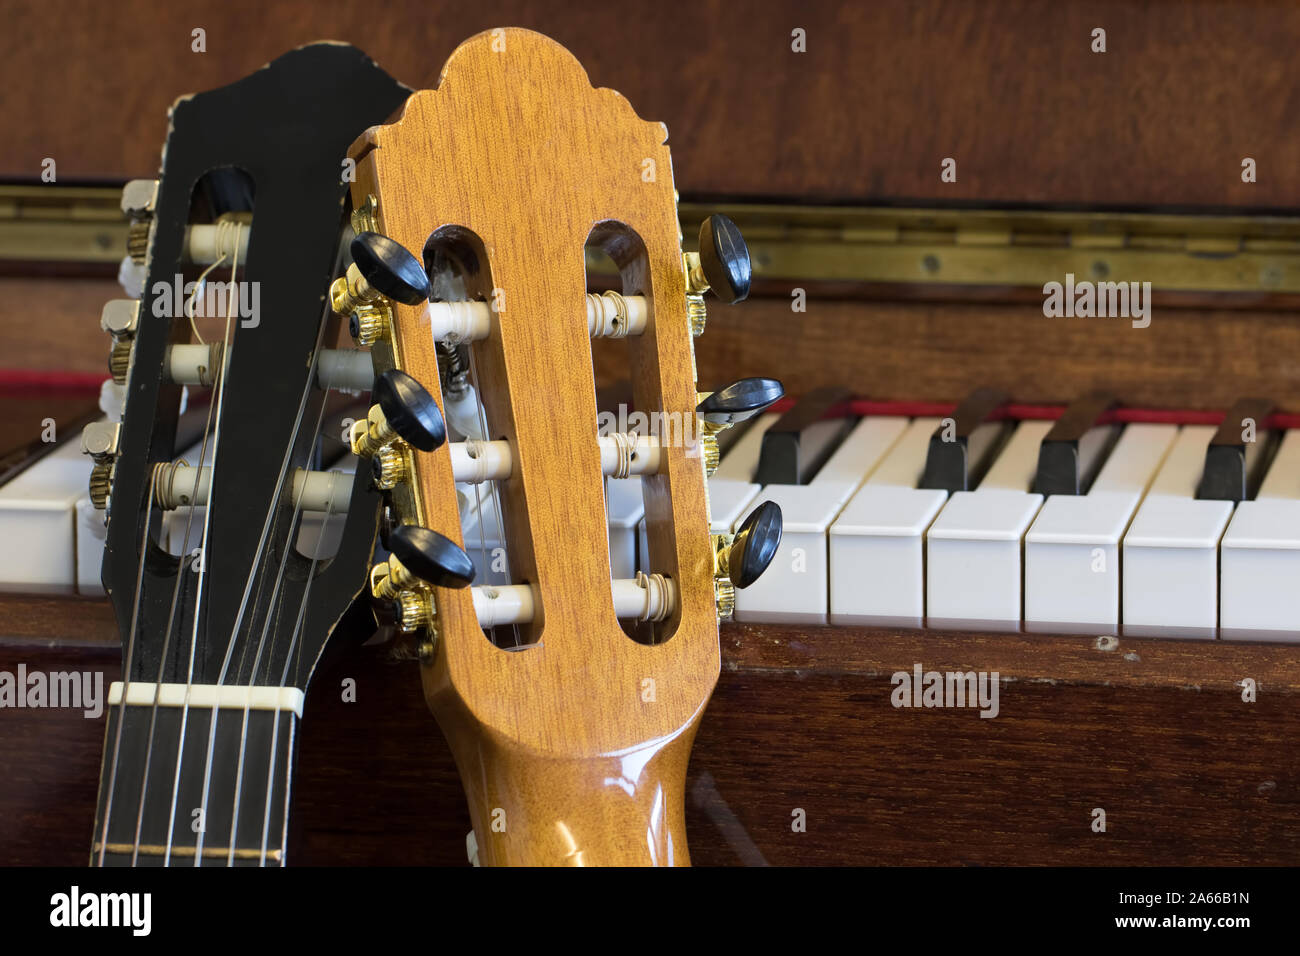 Music practice room. Acoustic guitar headstock and piano close-up. Two classical guitars resting on an old piano. Musical instruments in close up. Stock Photo